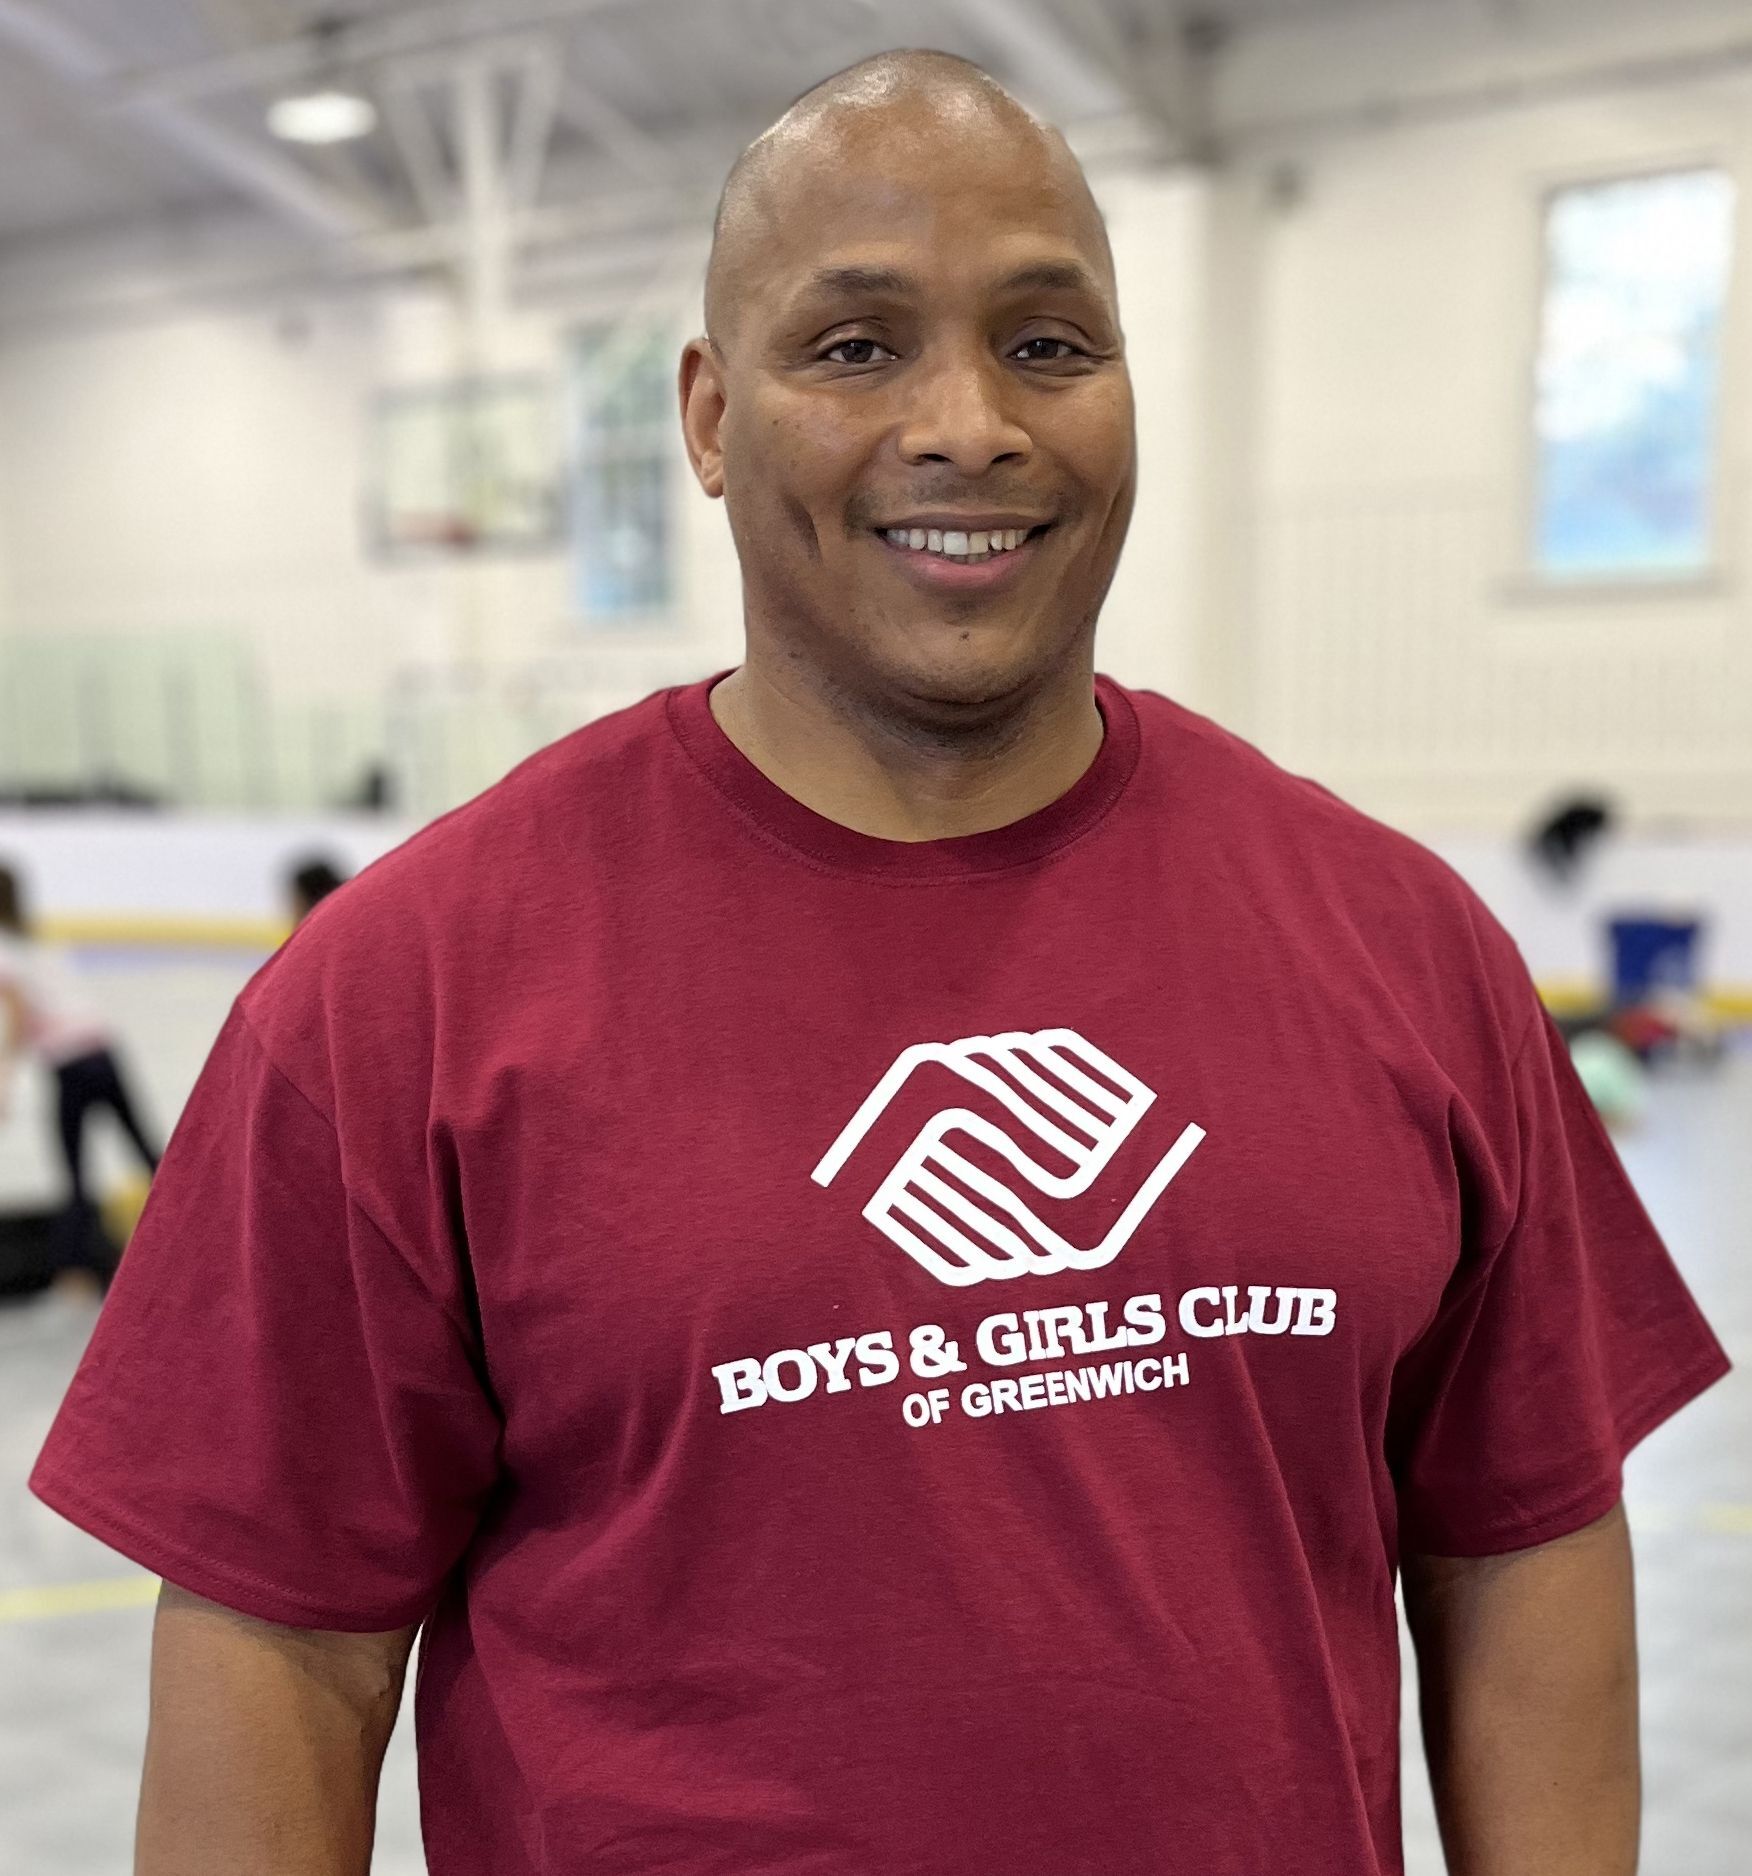 BGCG Welcomes Otis Bellamy as Director of Athletics and Youth Programs